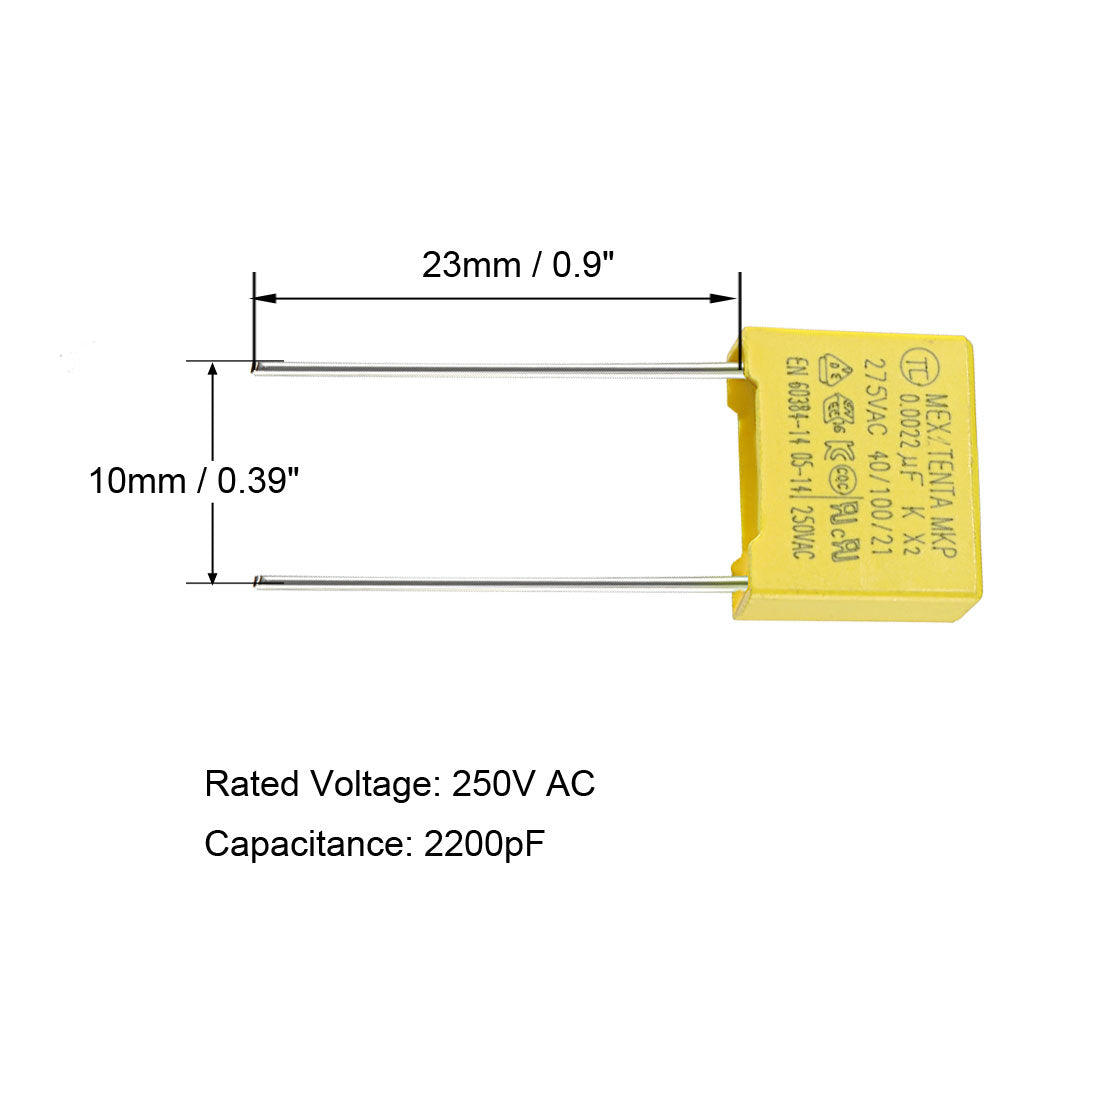 uxcell Uxcell Safety Capacitor Polypropylene Film 2200pF 275VAC X2 MKP 10 Pcs